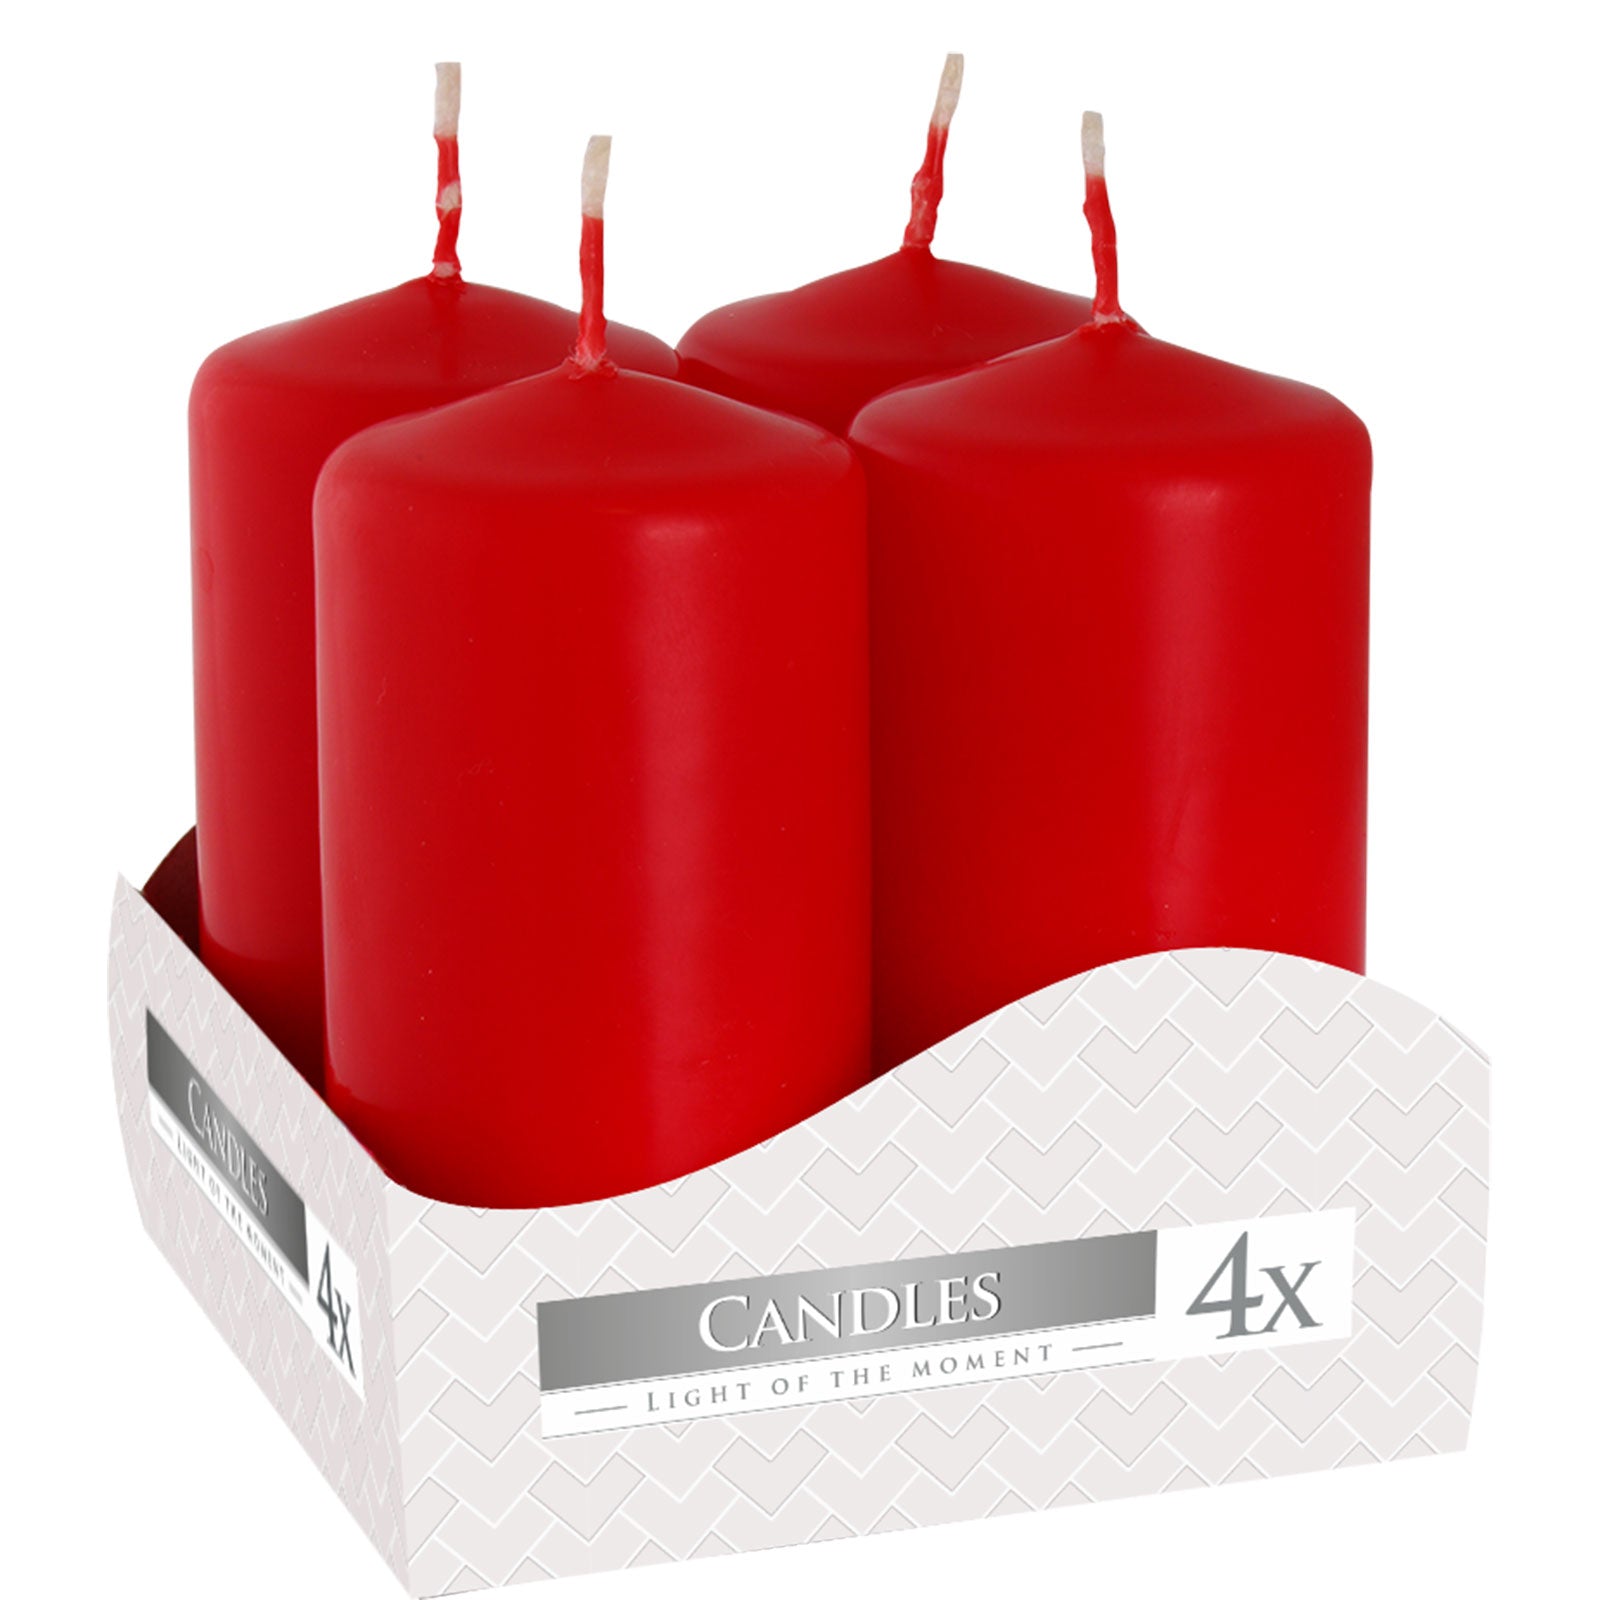 View Set of 4 Pillar Candles 40x80mm Red information